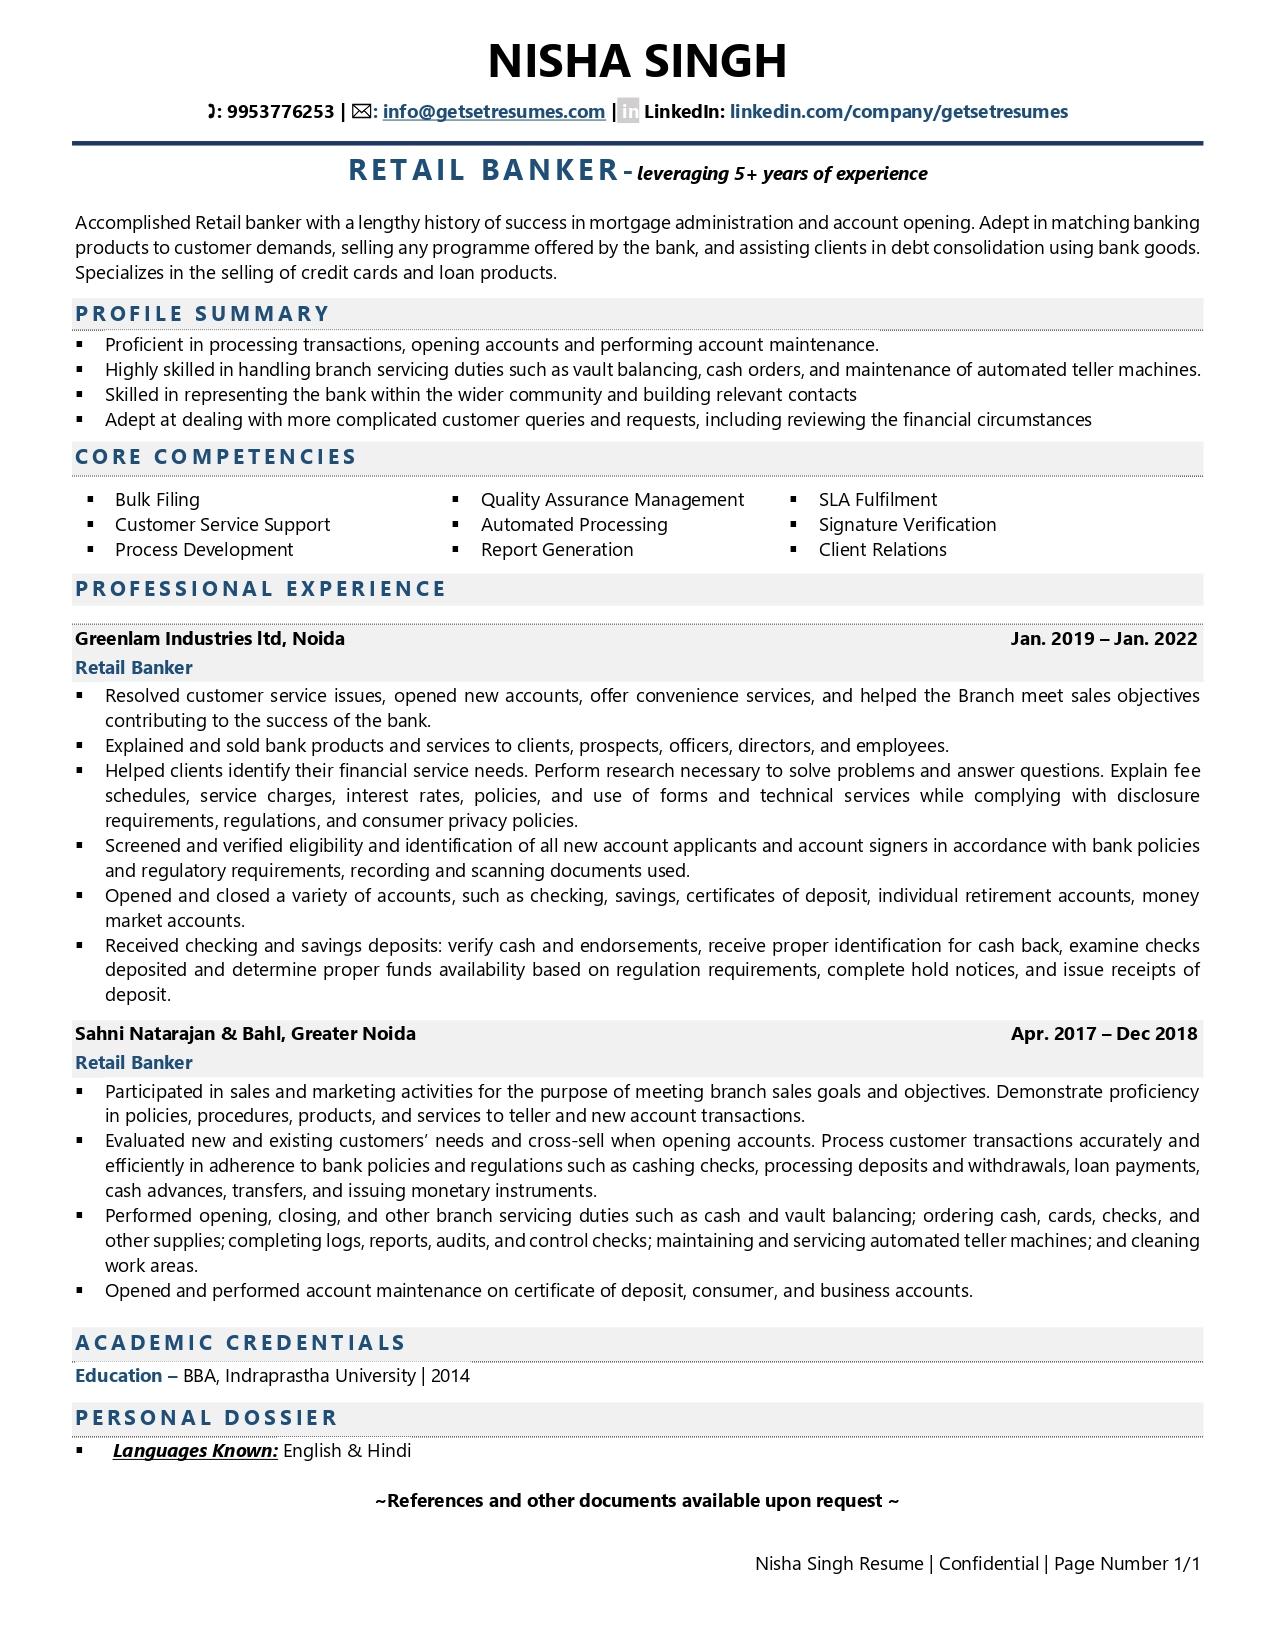 Retail/ Consumer Banker - Resume Example & Template